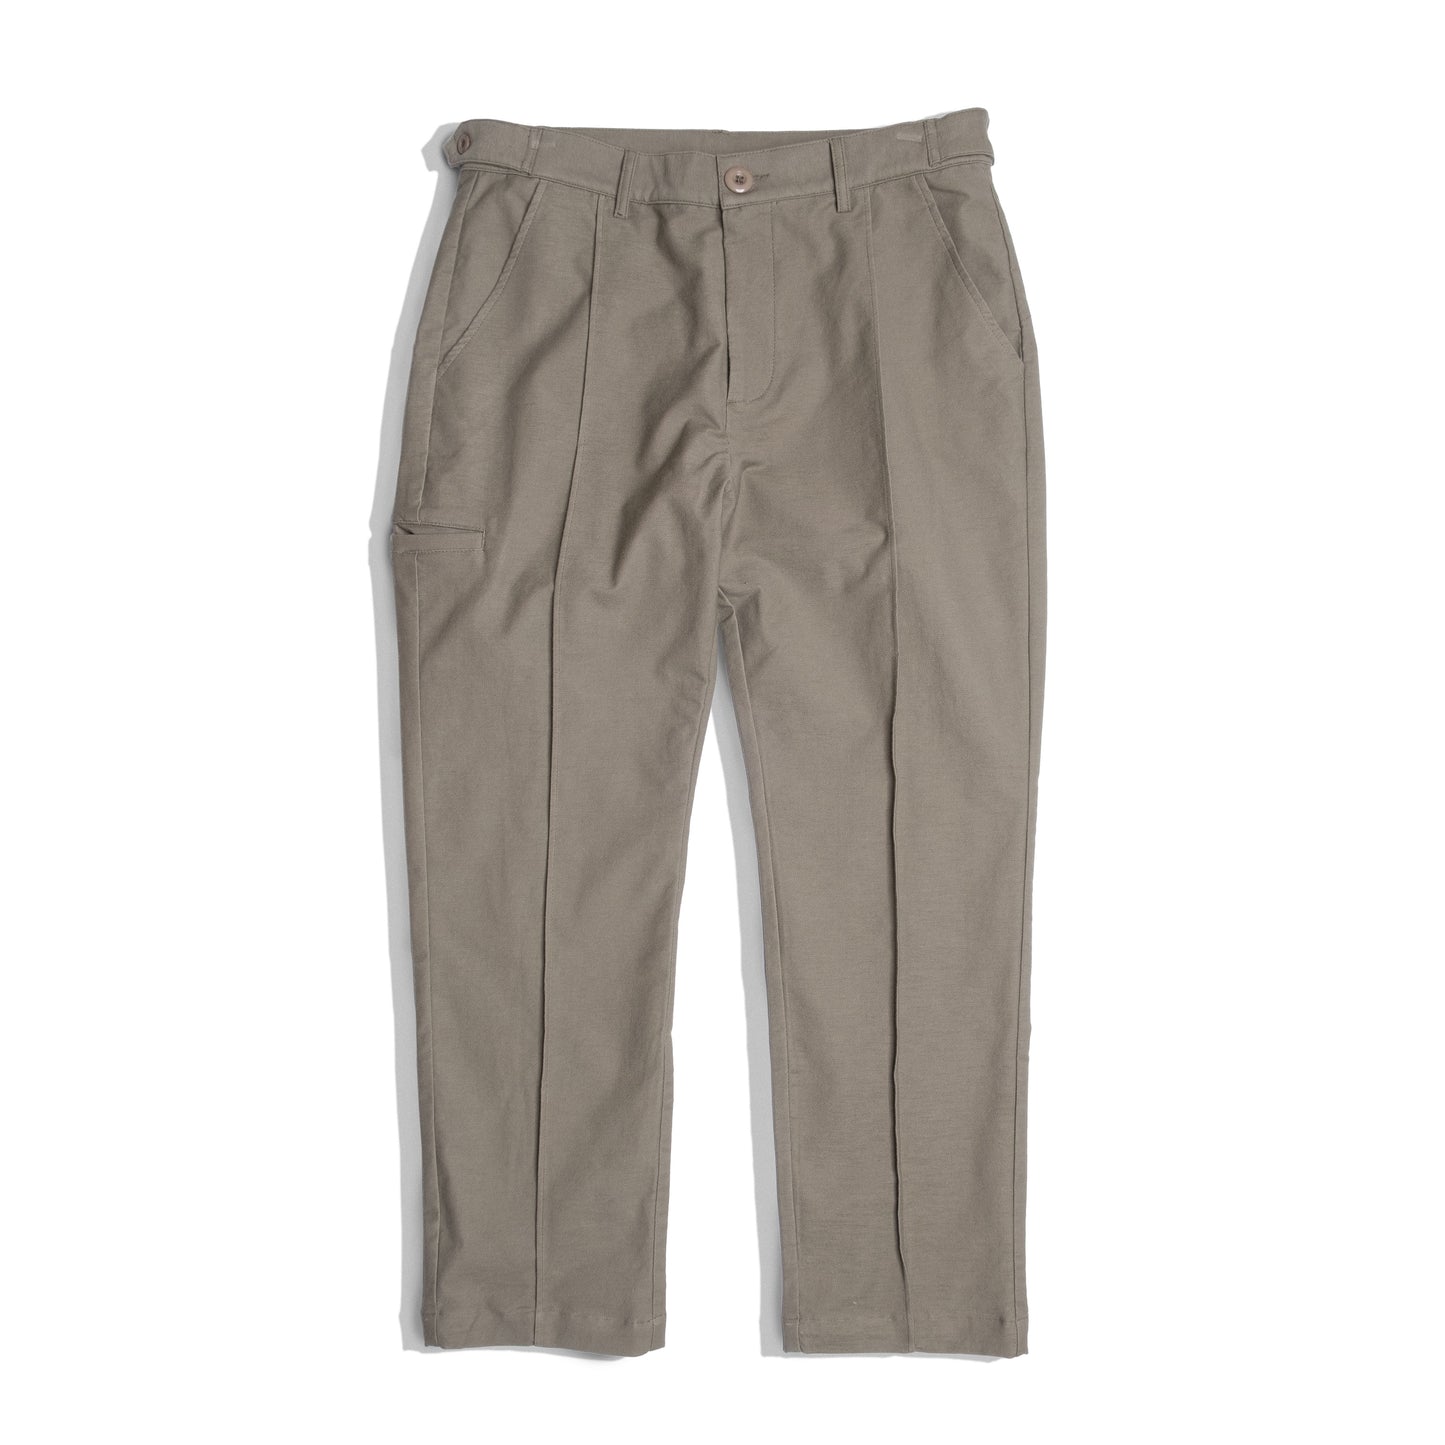 Pleated Pants / Cotton Rayon Stretch - Olive